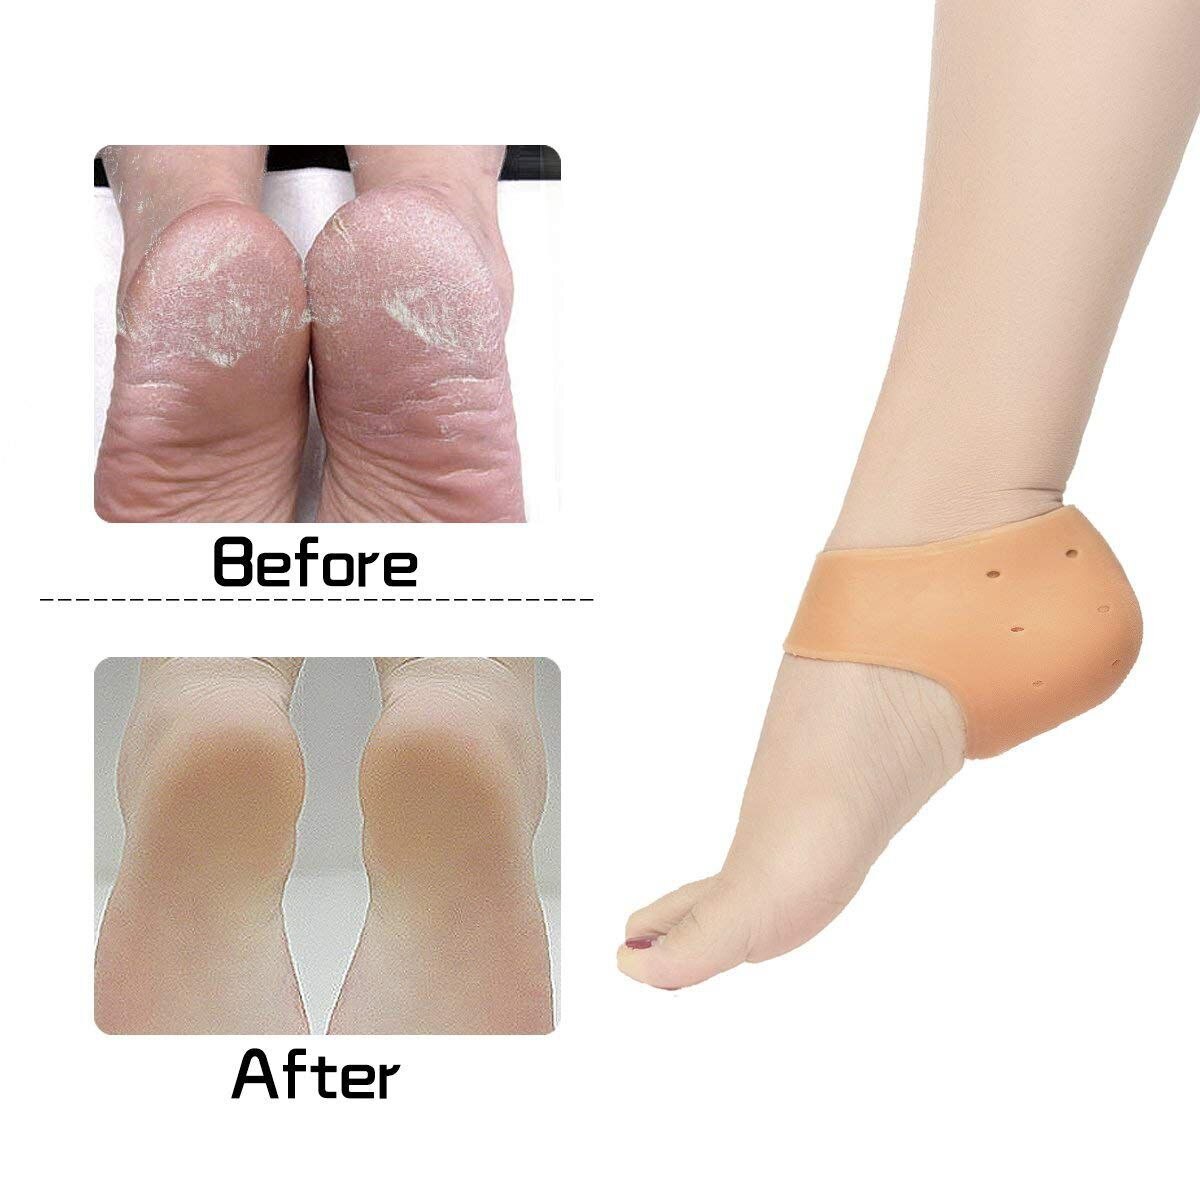 5Pairs Heel Sleeves, Breathable Silicone Heel Socks Protectors to Repair Dry Cracked Heel and Reduce Pains of Plantar Fas - ebowsos